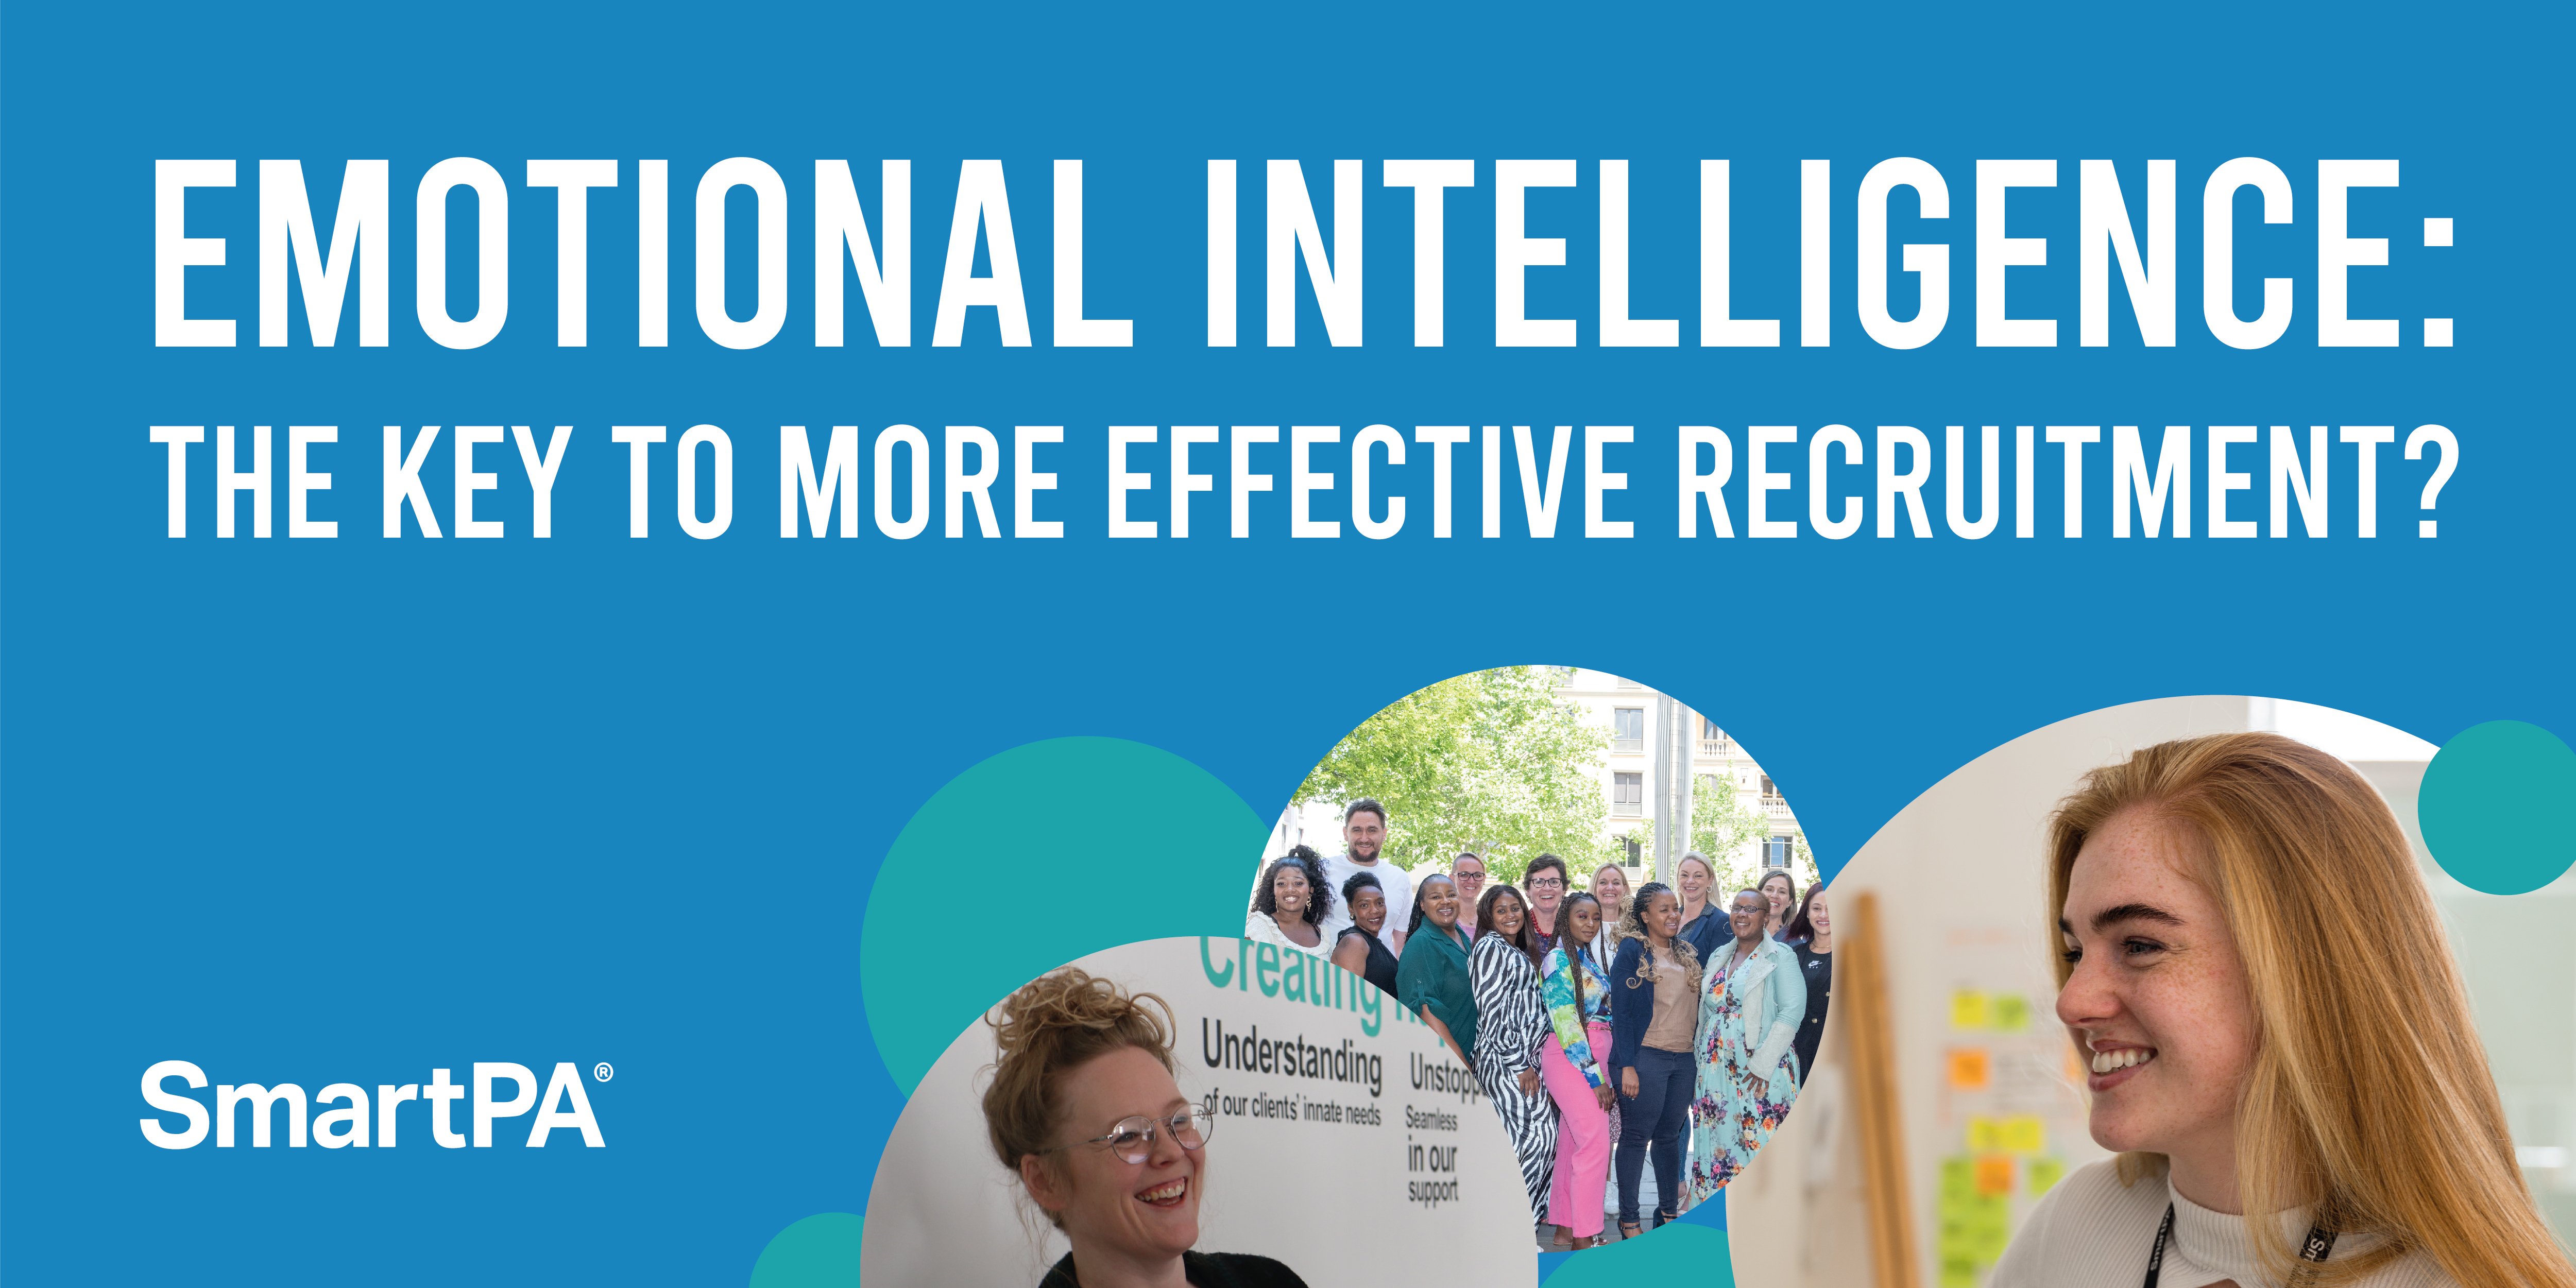 Emotional Intelligence: The key to more effective recruitment?